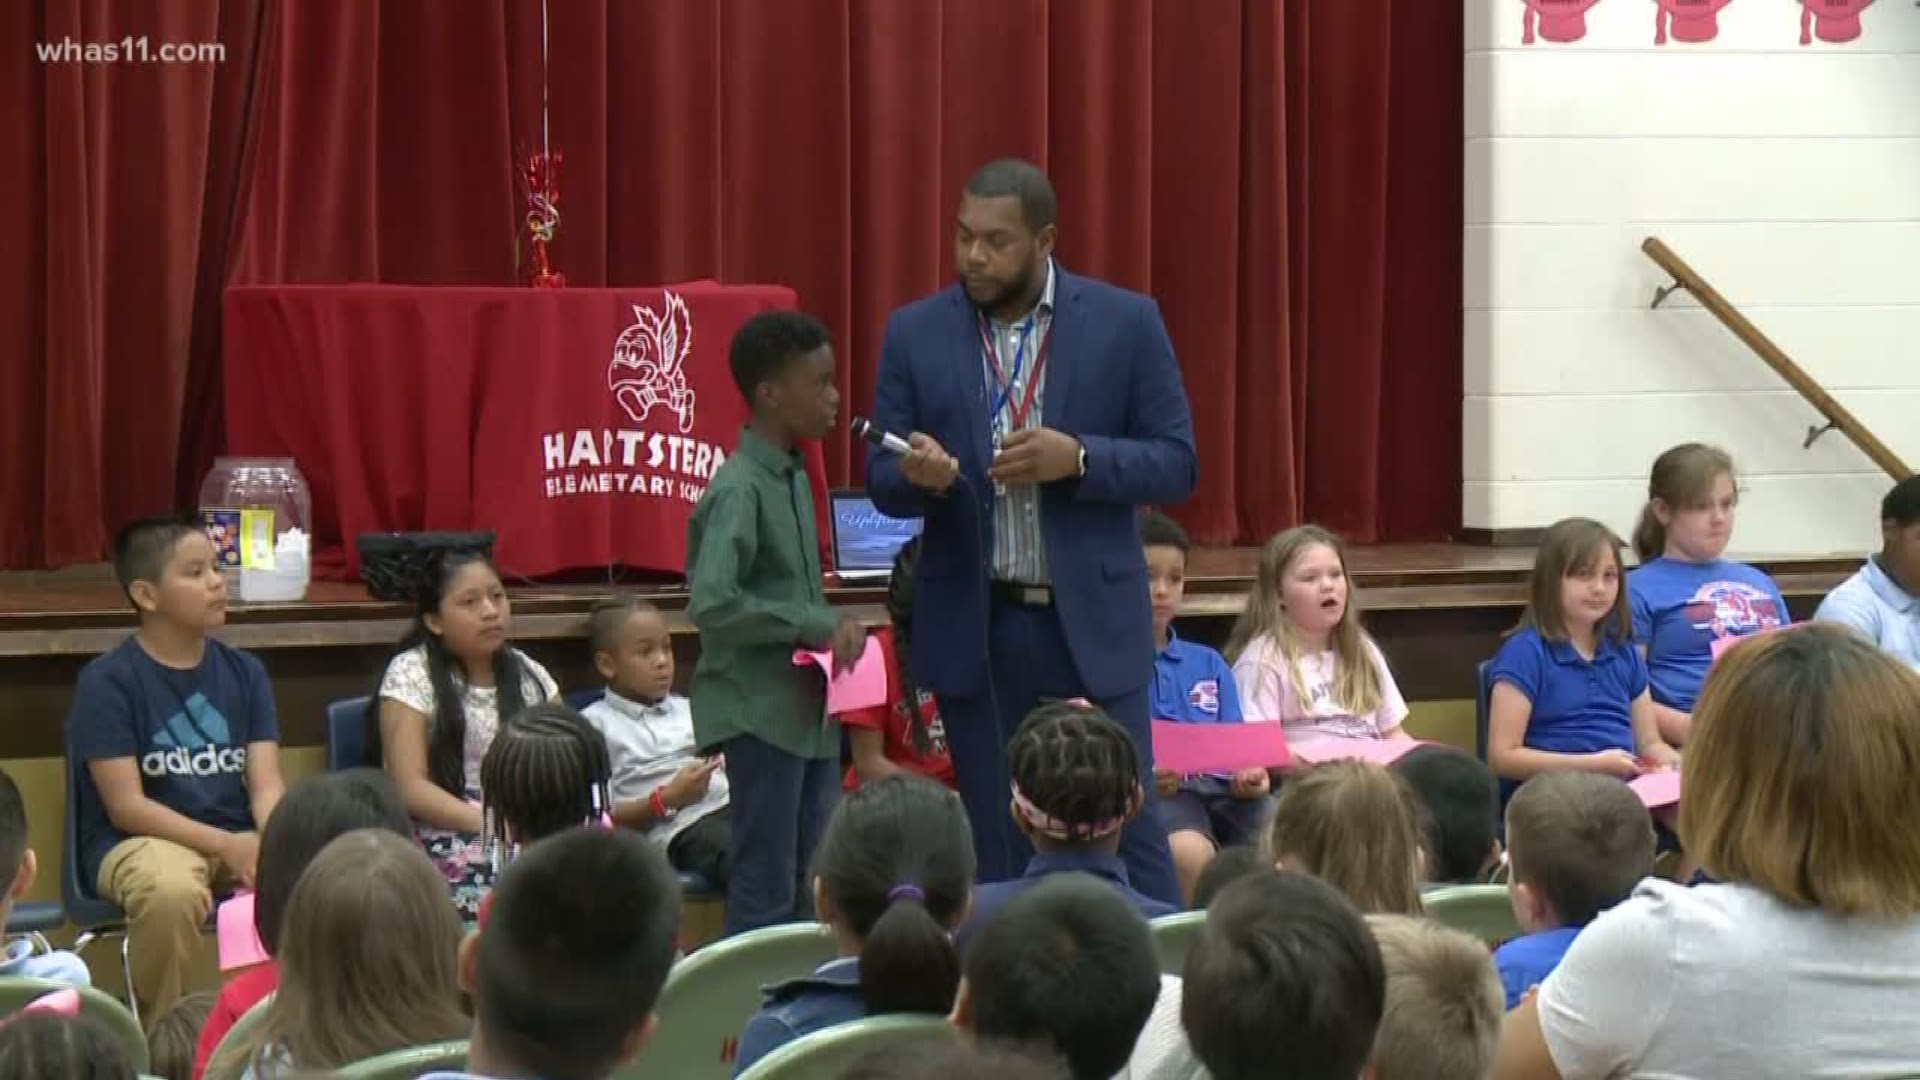 Some dedicated Hartstern Elementary students are getting rewarded for the hard work they put in every single day.